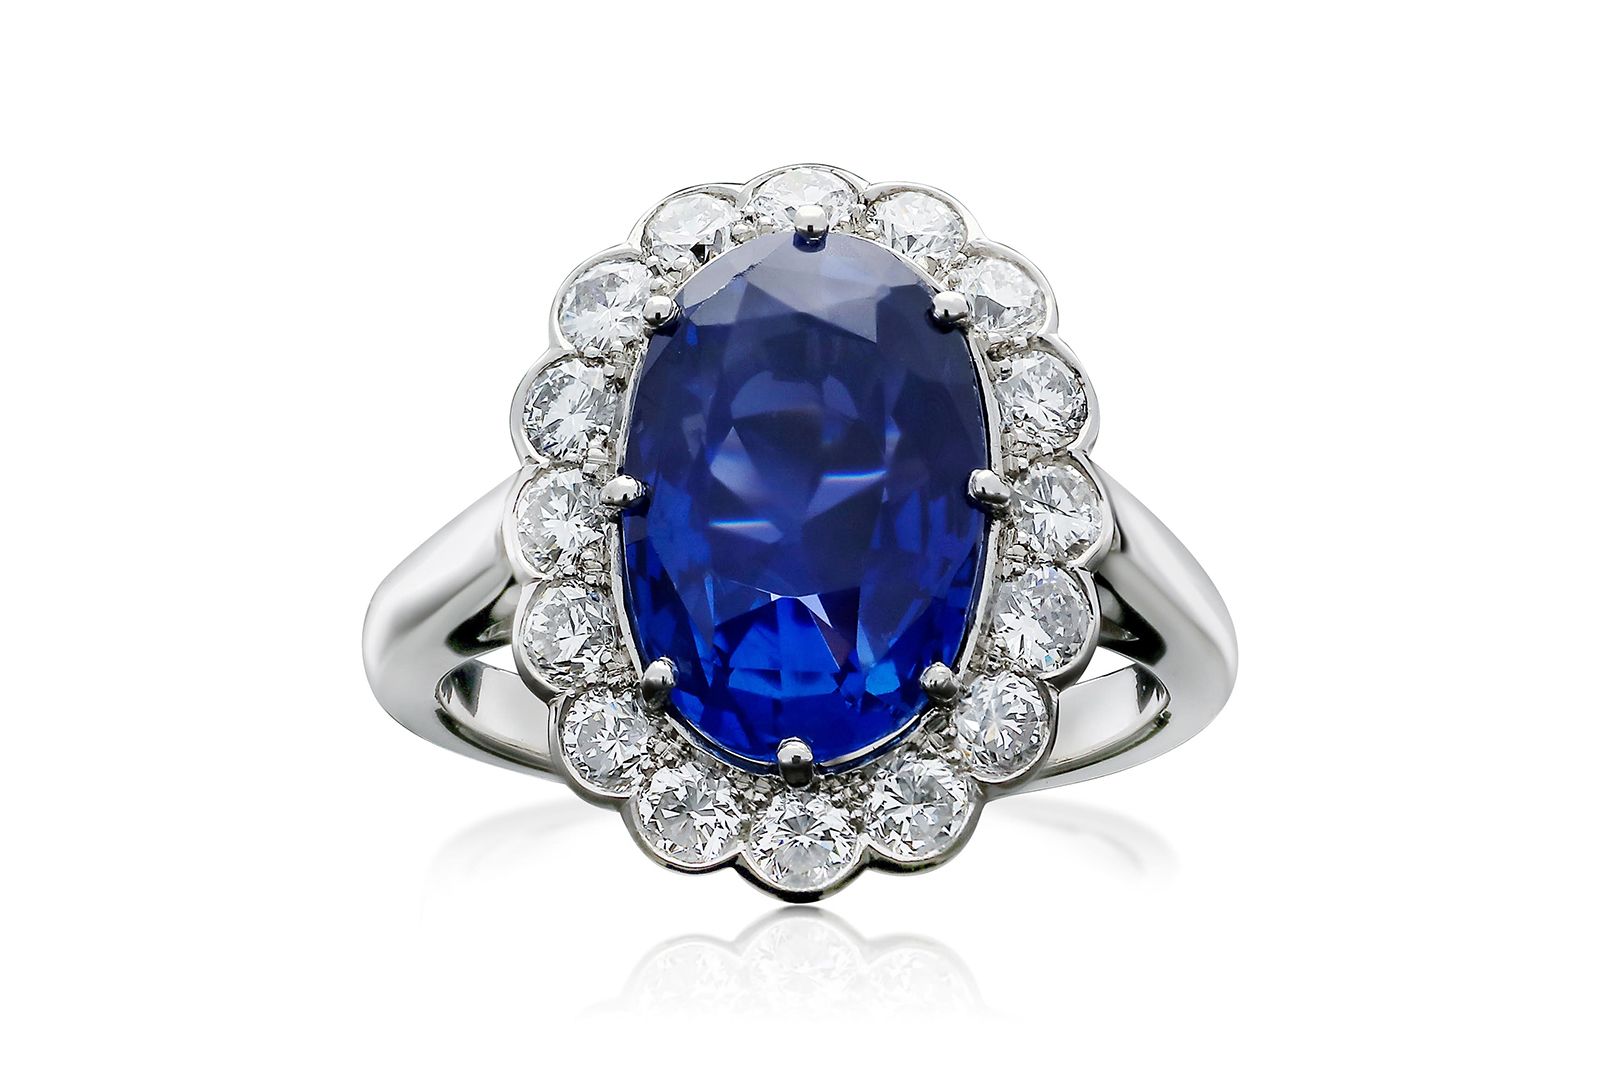 A diamond and sapphire ring from the 1980s in the spirit of Princess Diana’s famous engagement ring, courtesy of Hancocks London 